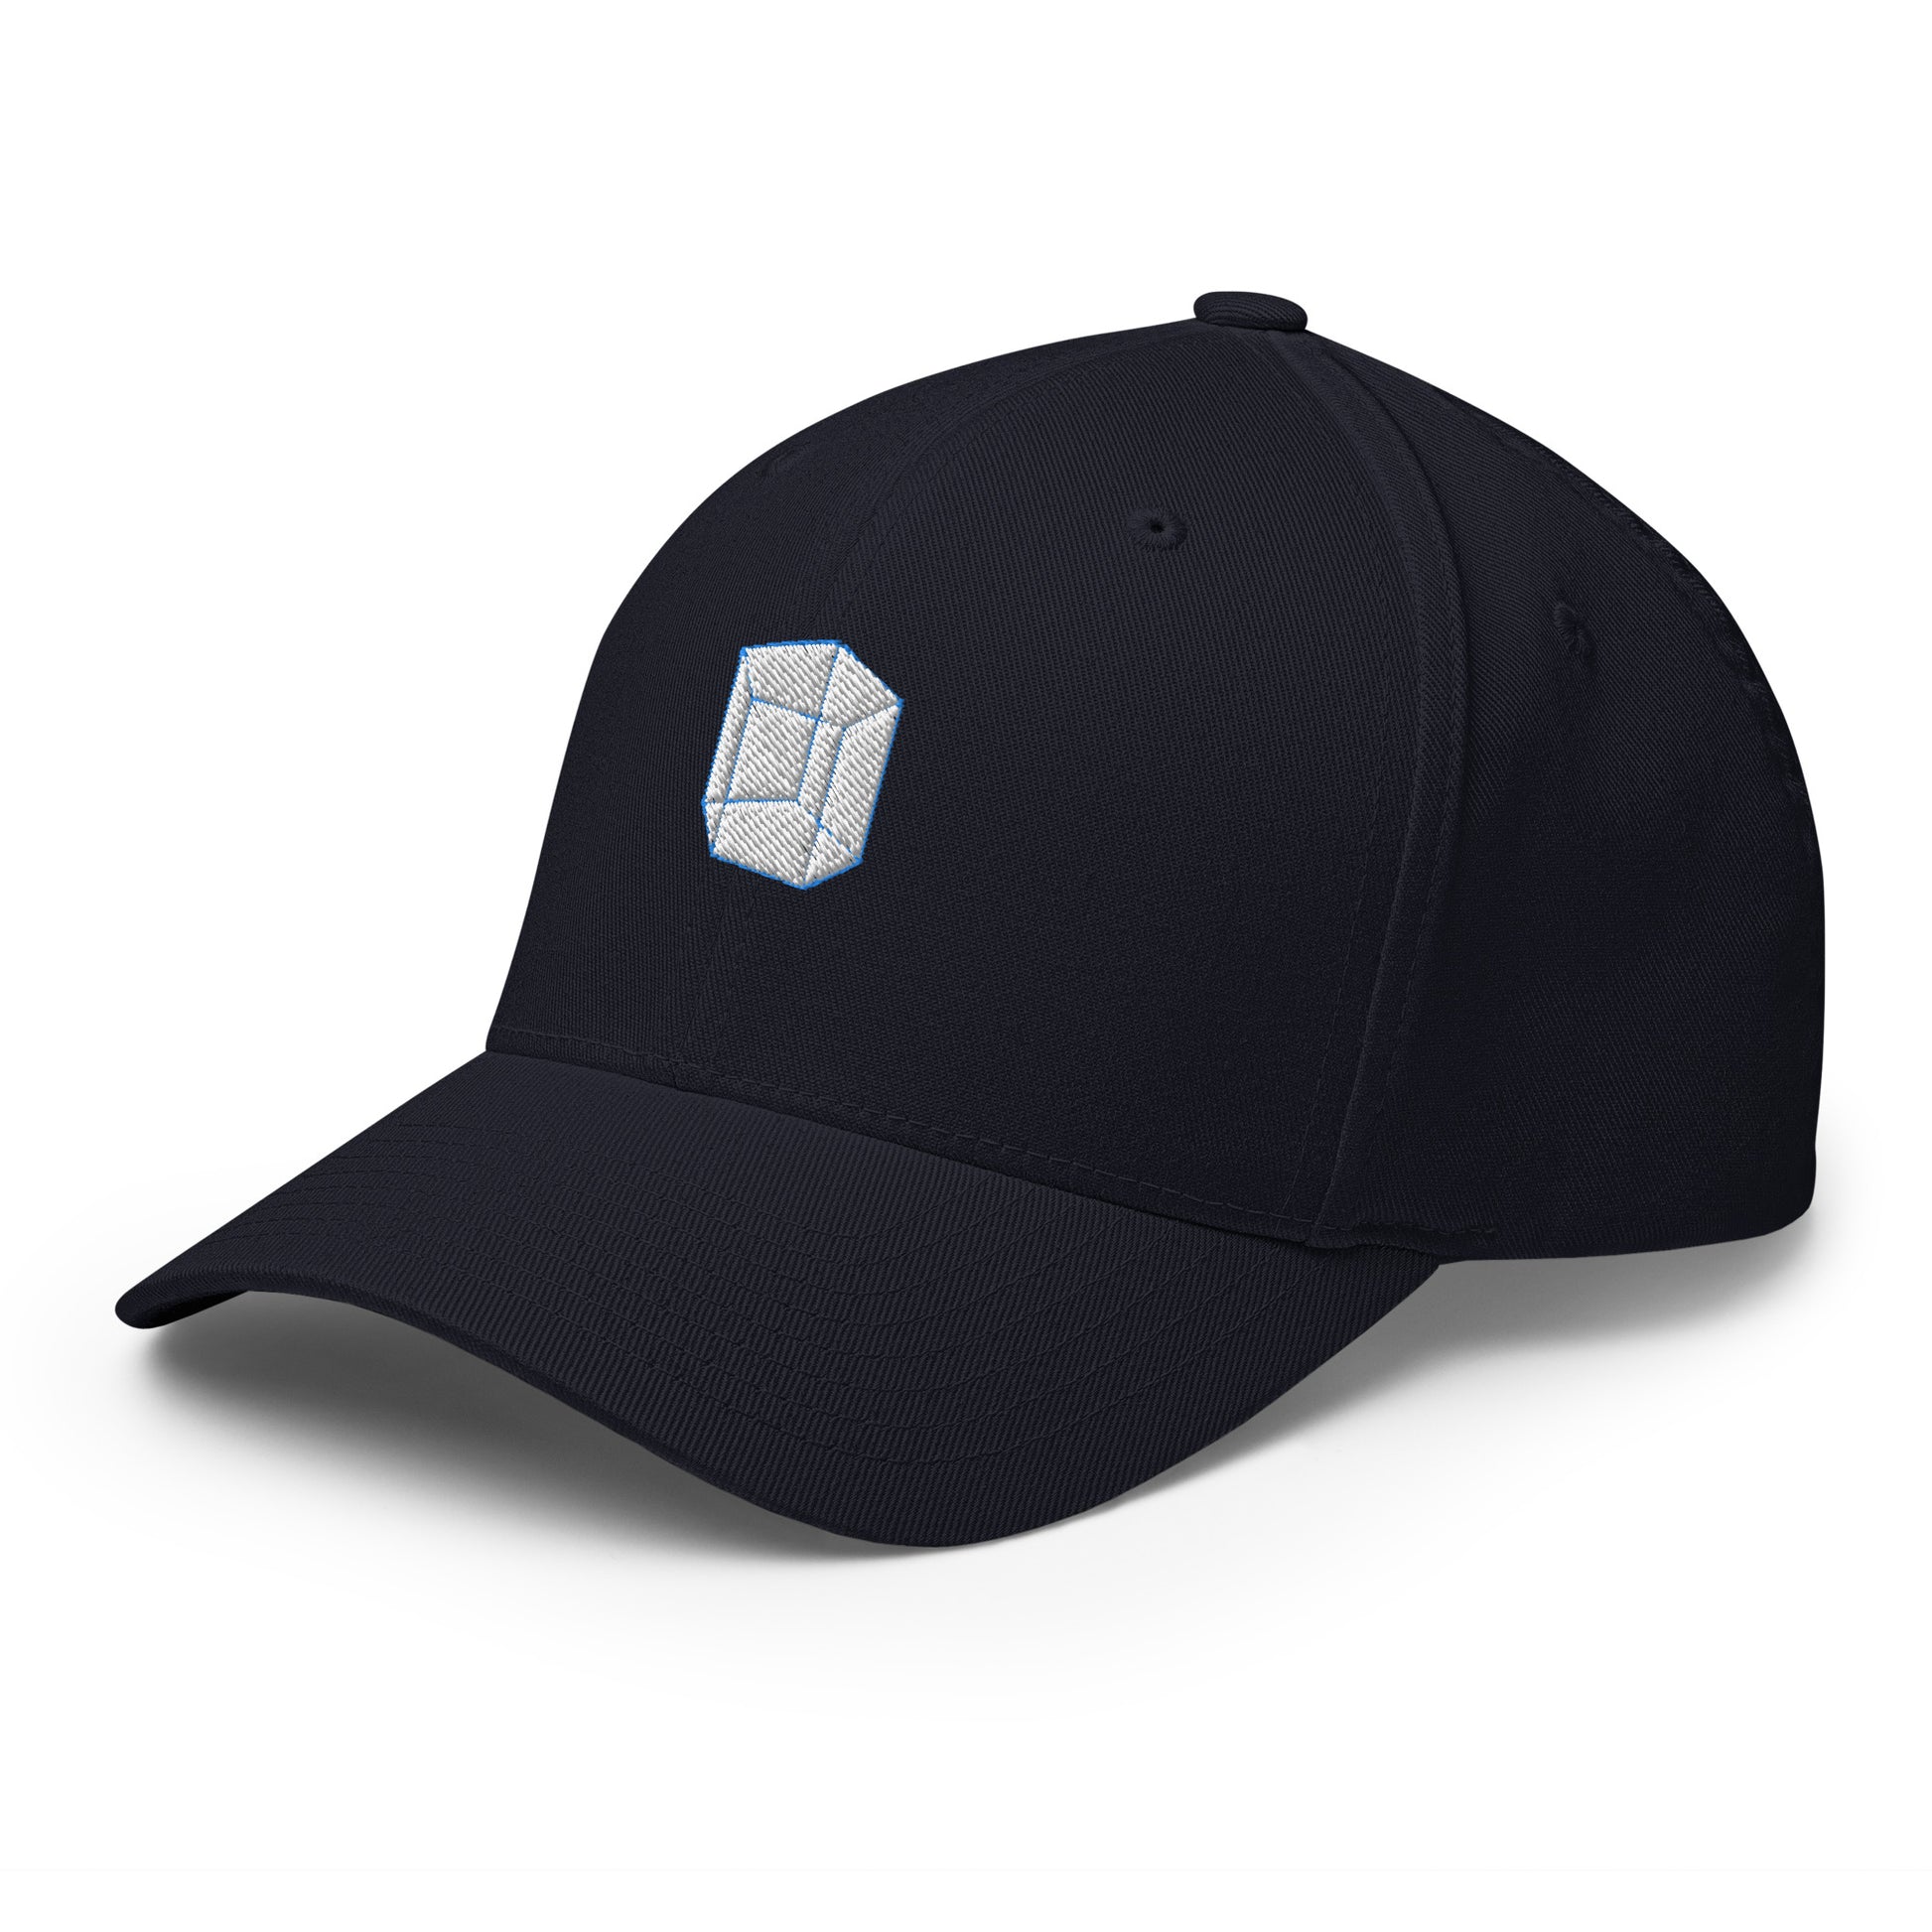 cap-from-the-front-with-geometric-shape-symbol